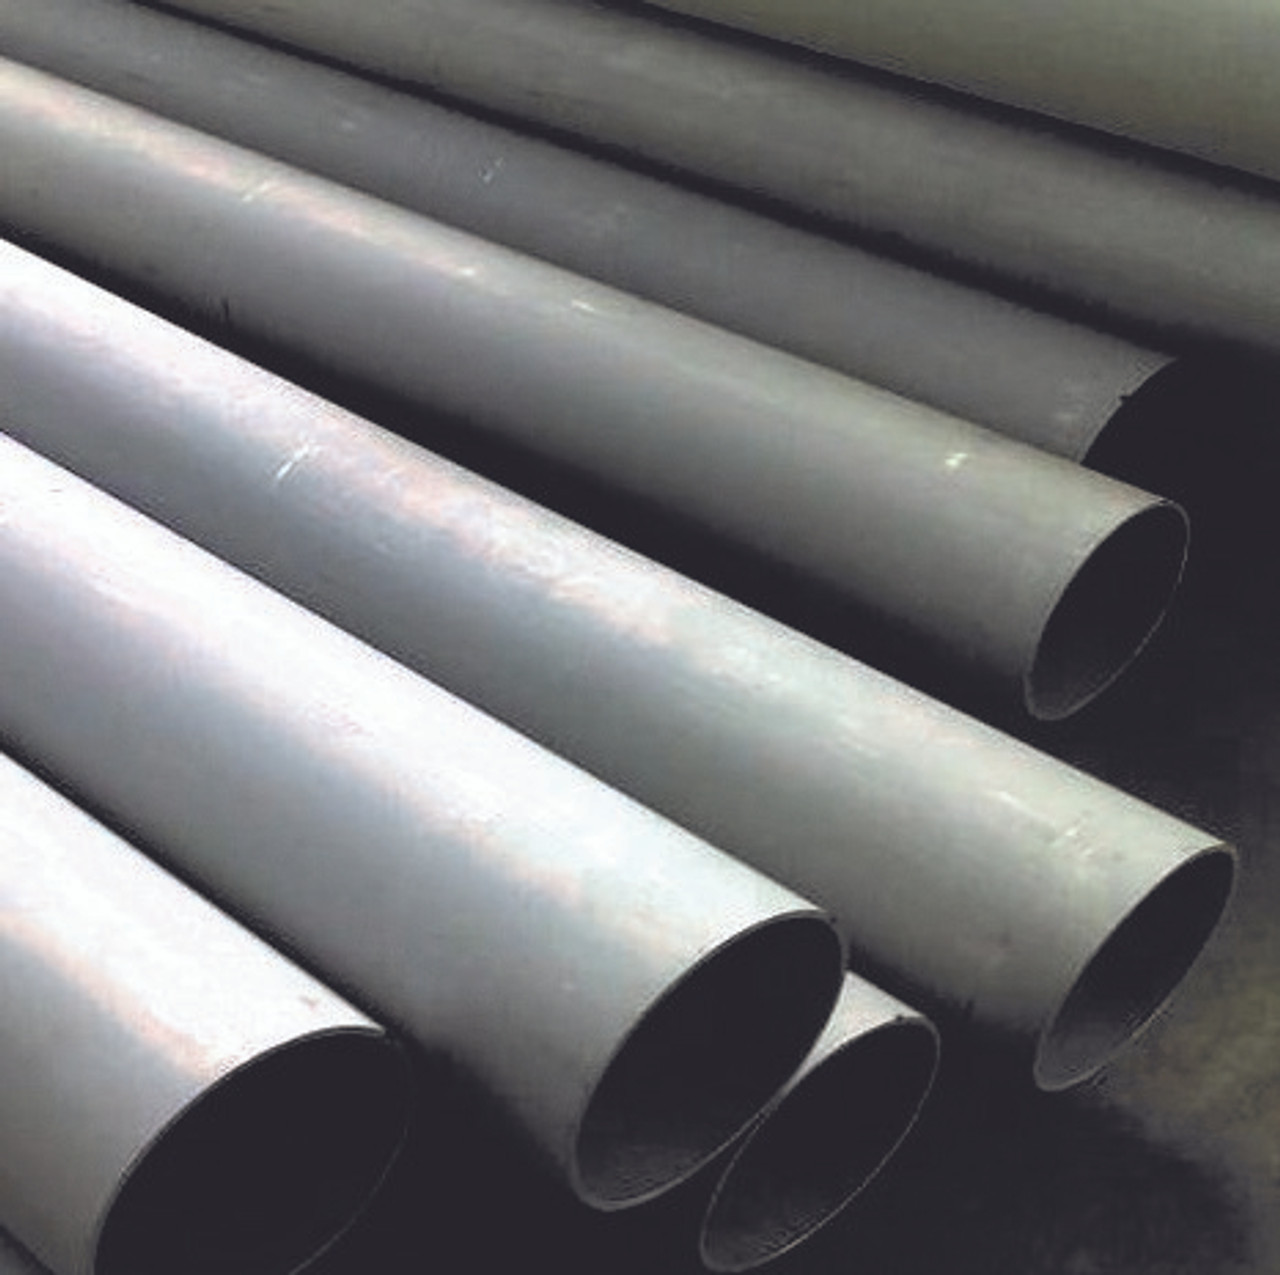 Welded Pipe Stainless Steel Seamless Sch10 1''2000mm Astm A269